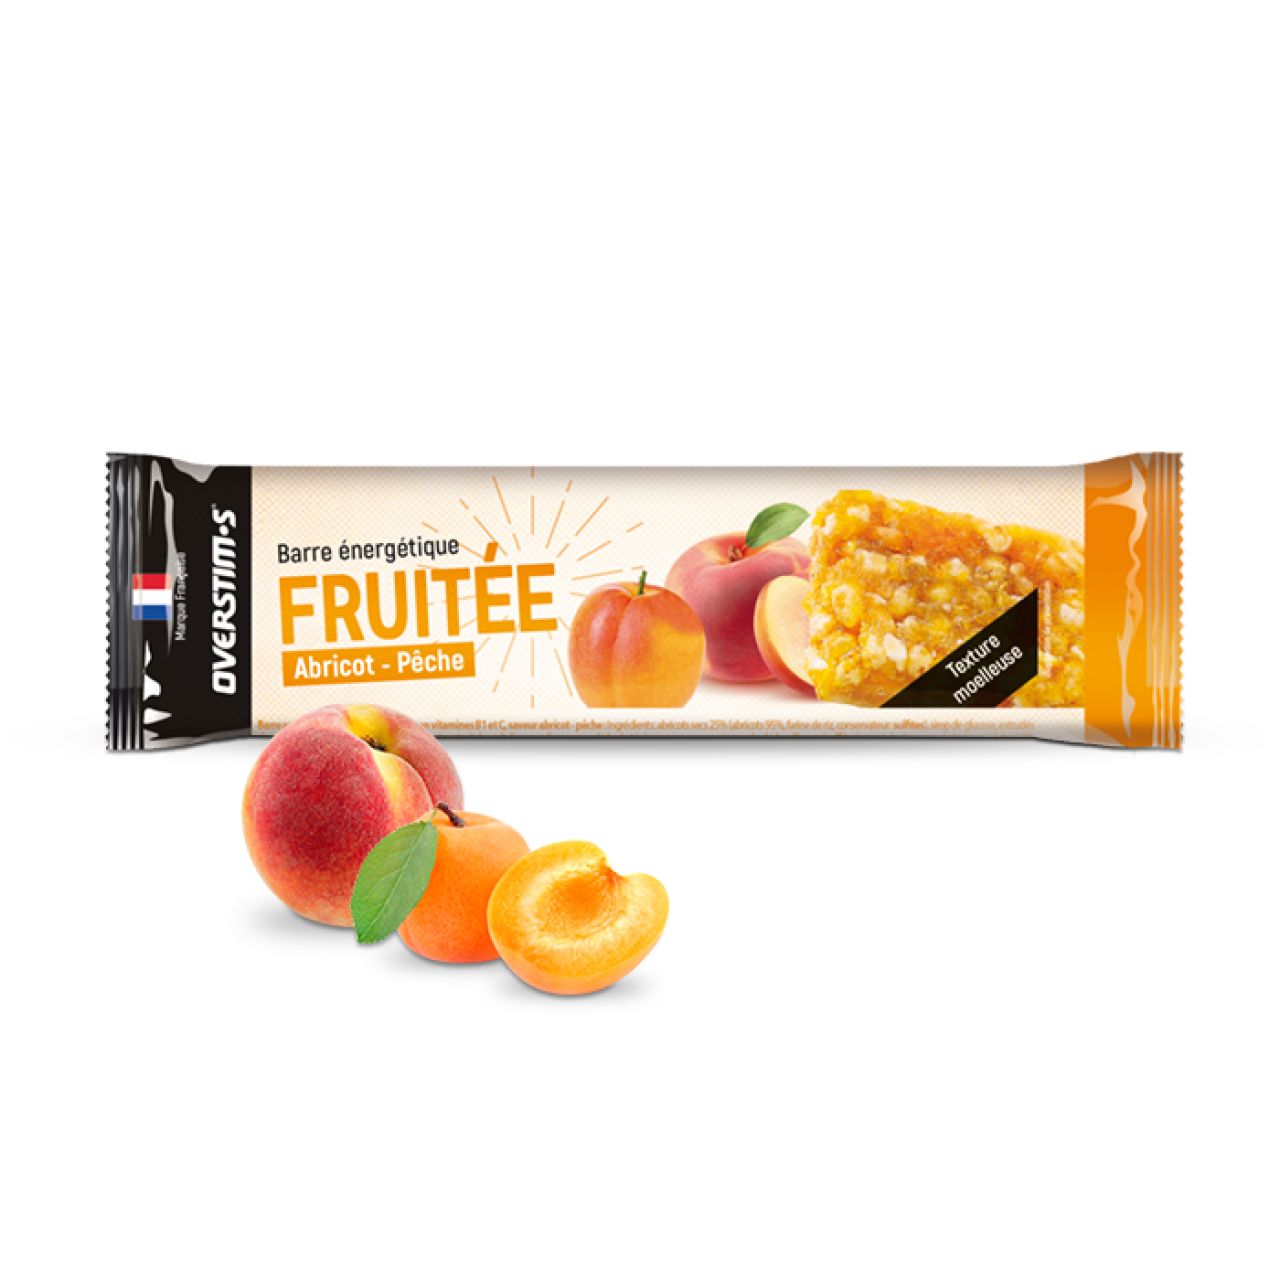 OVERSTIMS BARRES FRUITEES ABRICOT PECHE Barres energetiques